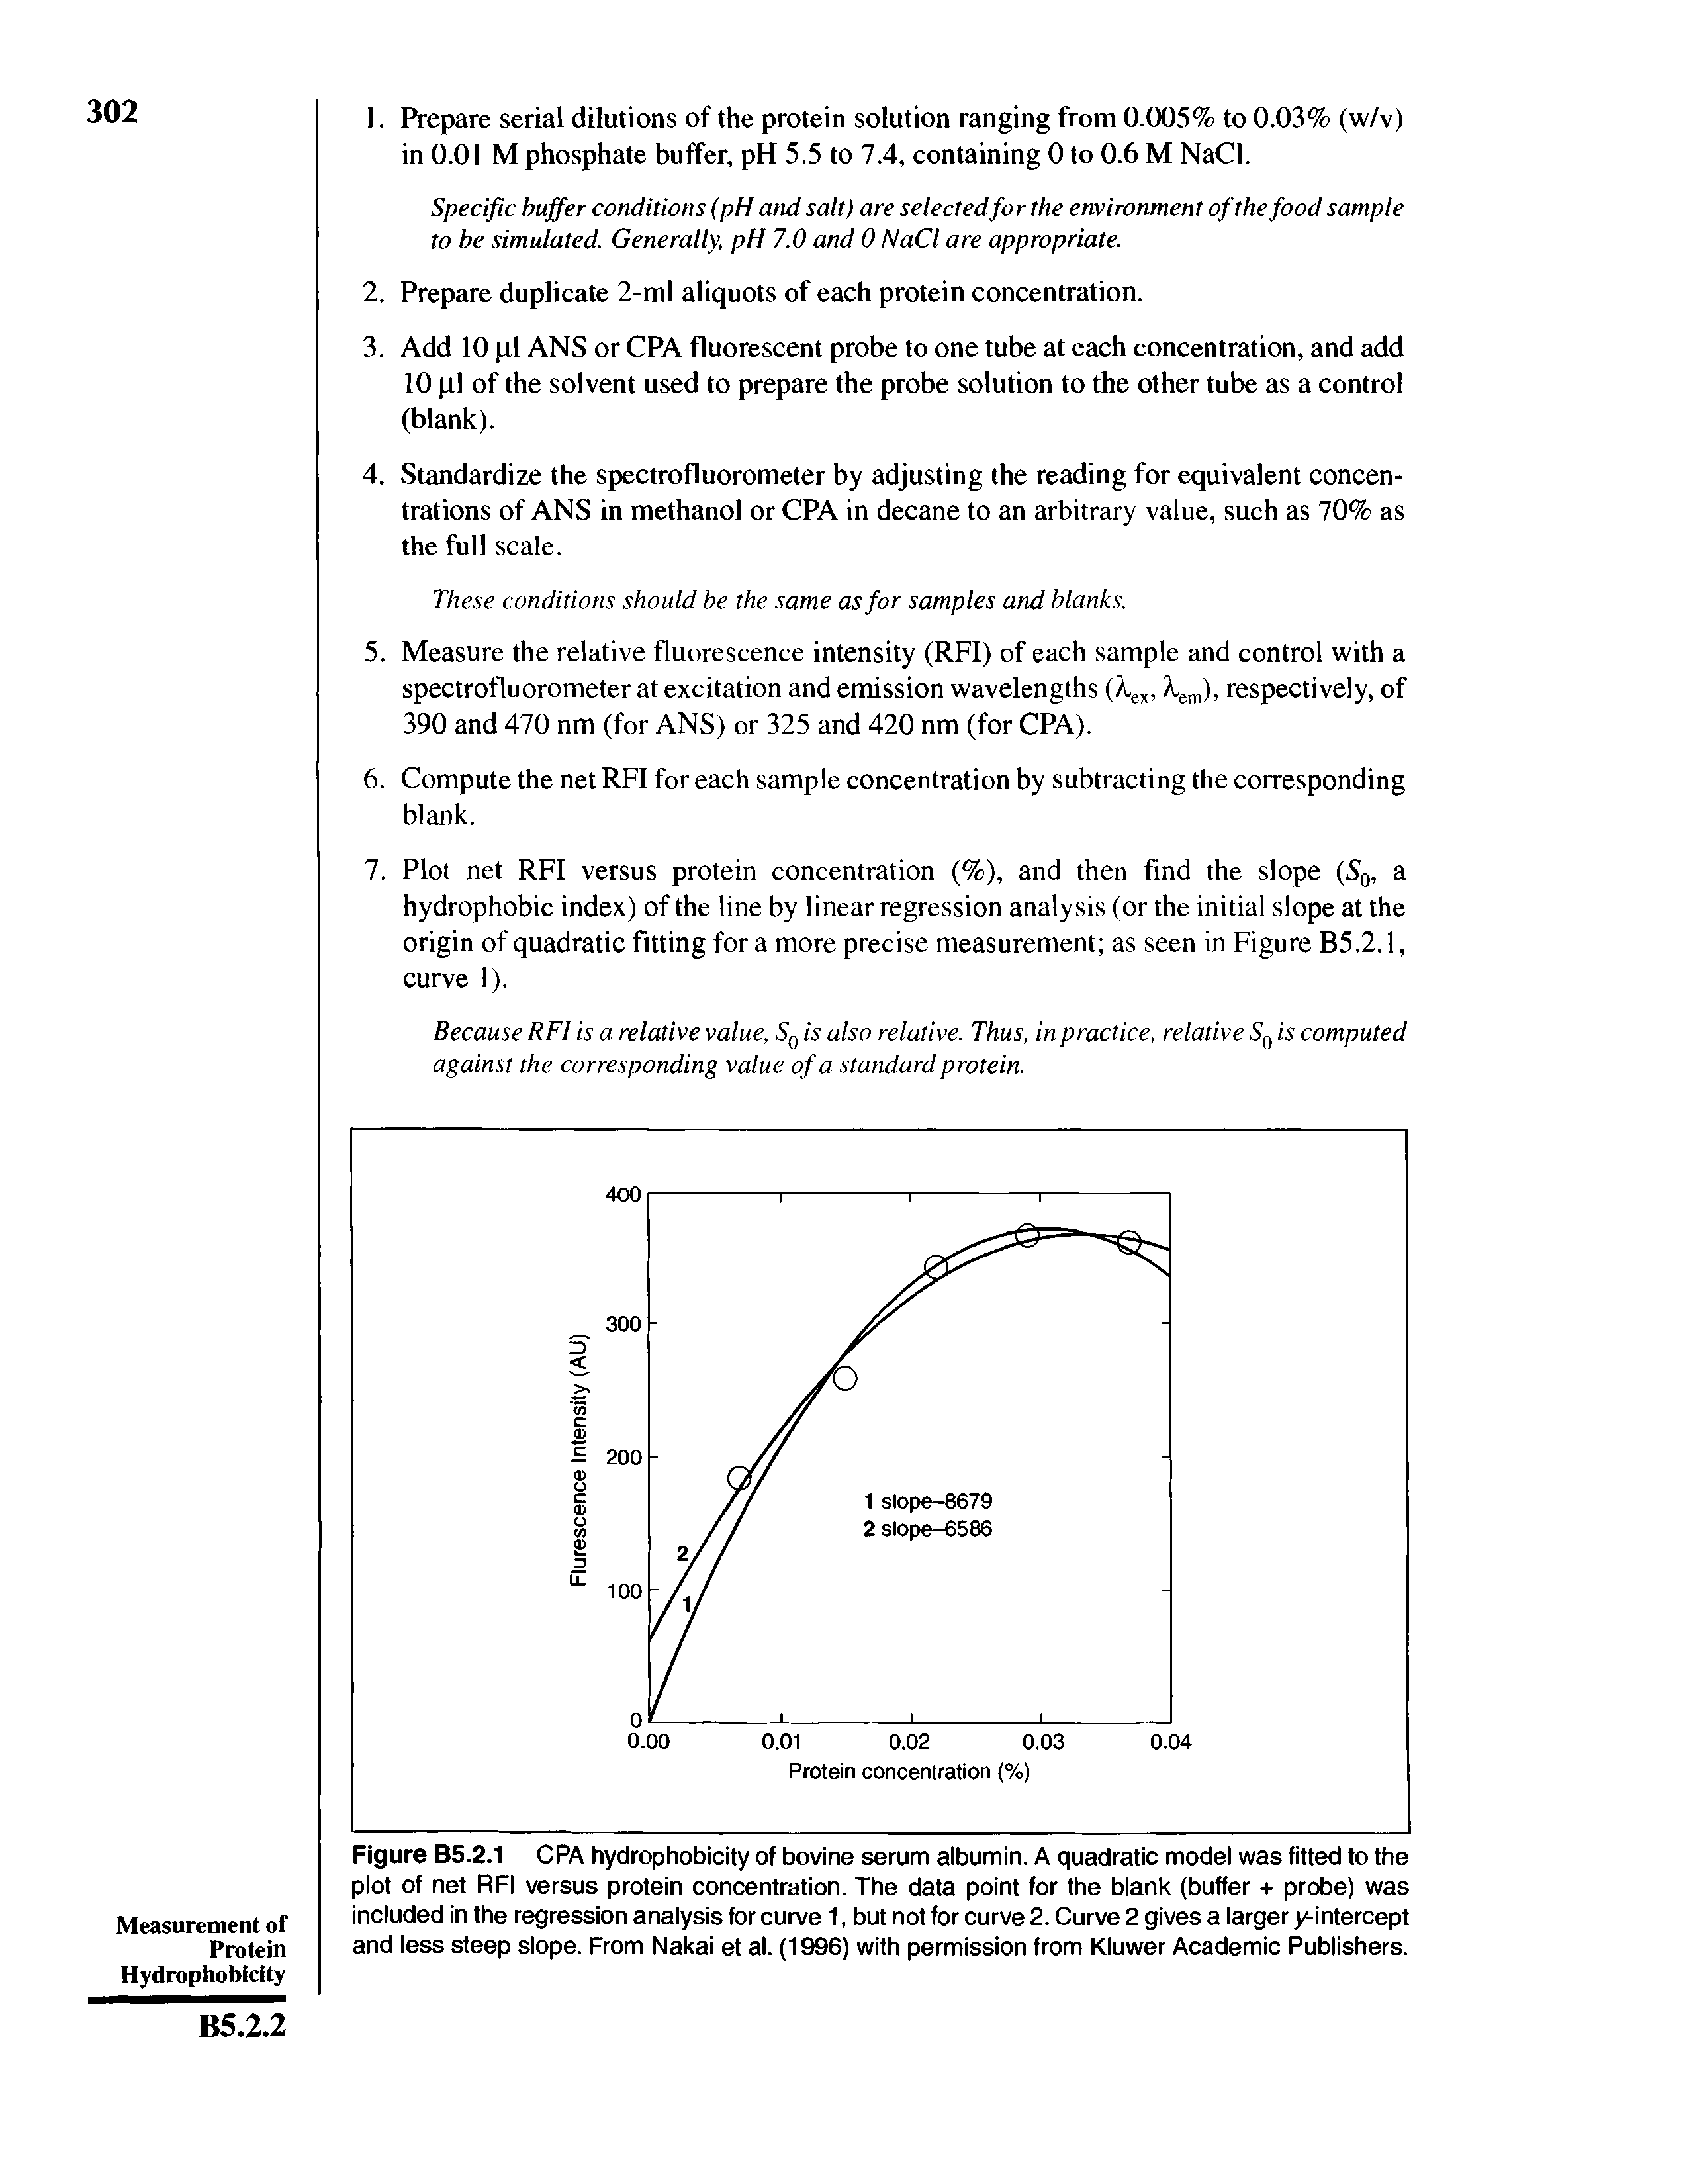 Figure B5.2.1 CPA hydrophobicity of bovine serum albumin. A quadratic model was fitted to the plot of net RFI versus protein concentration. The data point for the blank (buffer + probe) was included in the regression analysis for curve 1, but not for curve 2. Curve 2 gives a larger y-intercept and less steep slope. From Nakai et al. (1996) with permission from Kluwer Academic Publishers.